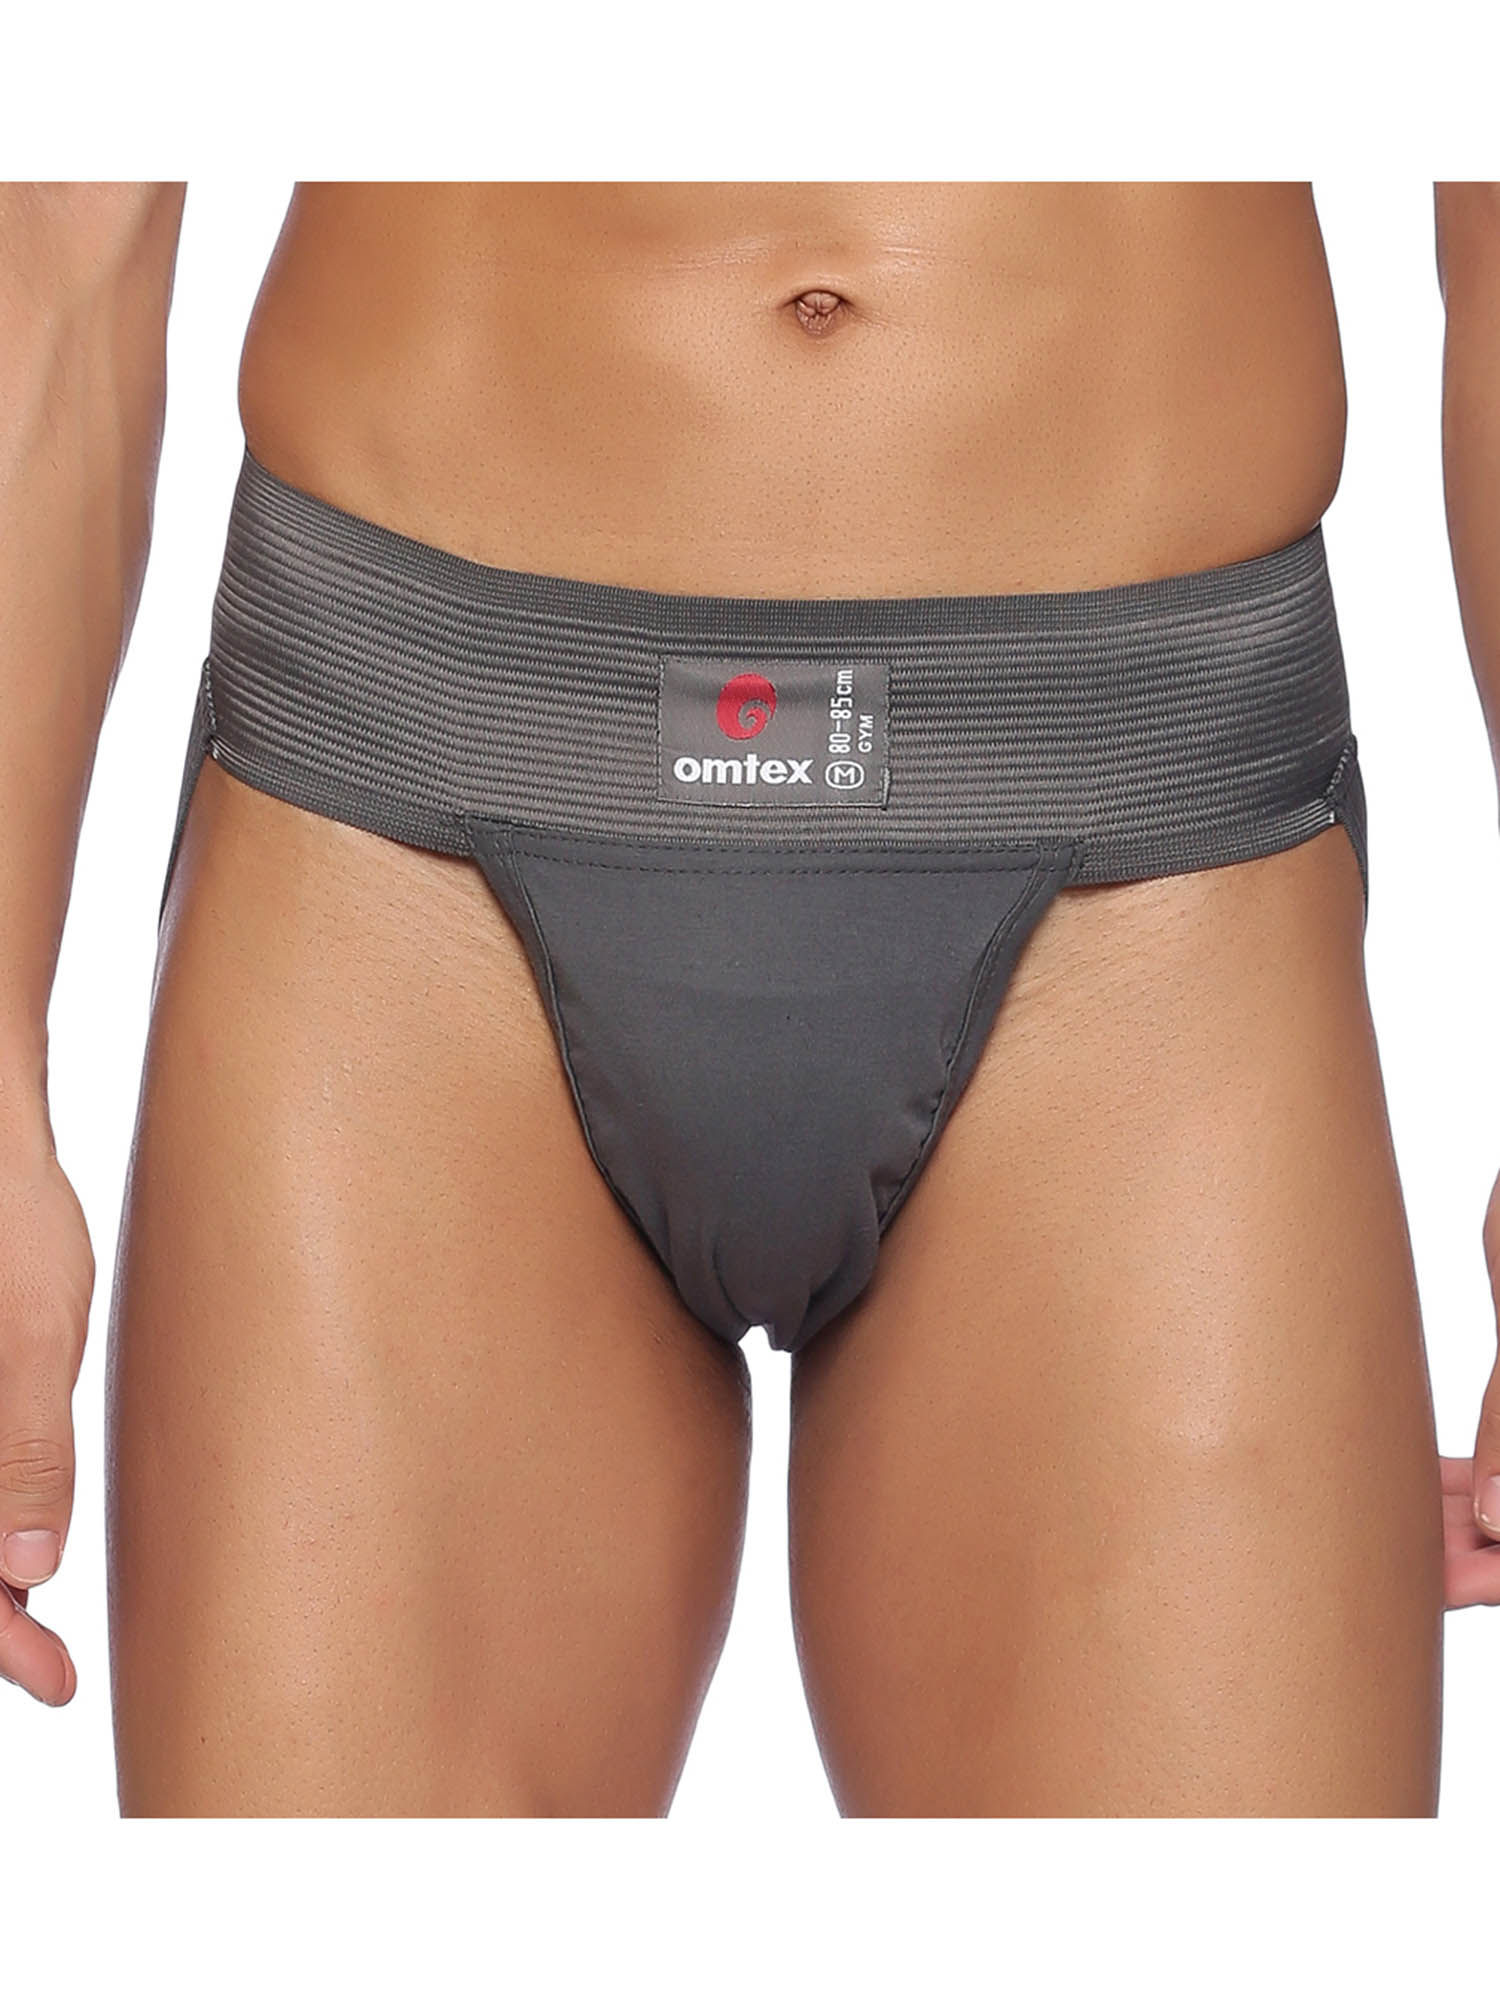 omtex Athletic Gym Cotton Stretchable Supporter Jockstraps with Cup Pocket  at Rs 240/piece, Jockstrap in Mumbai